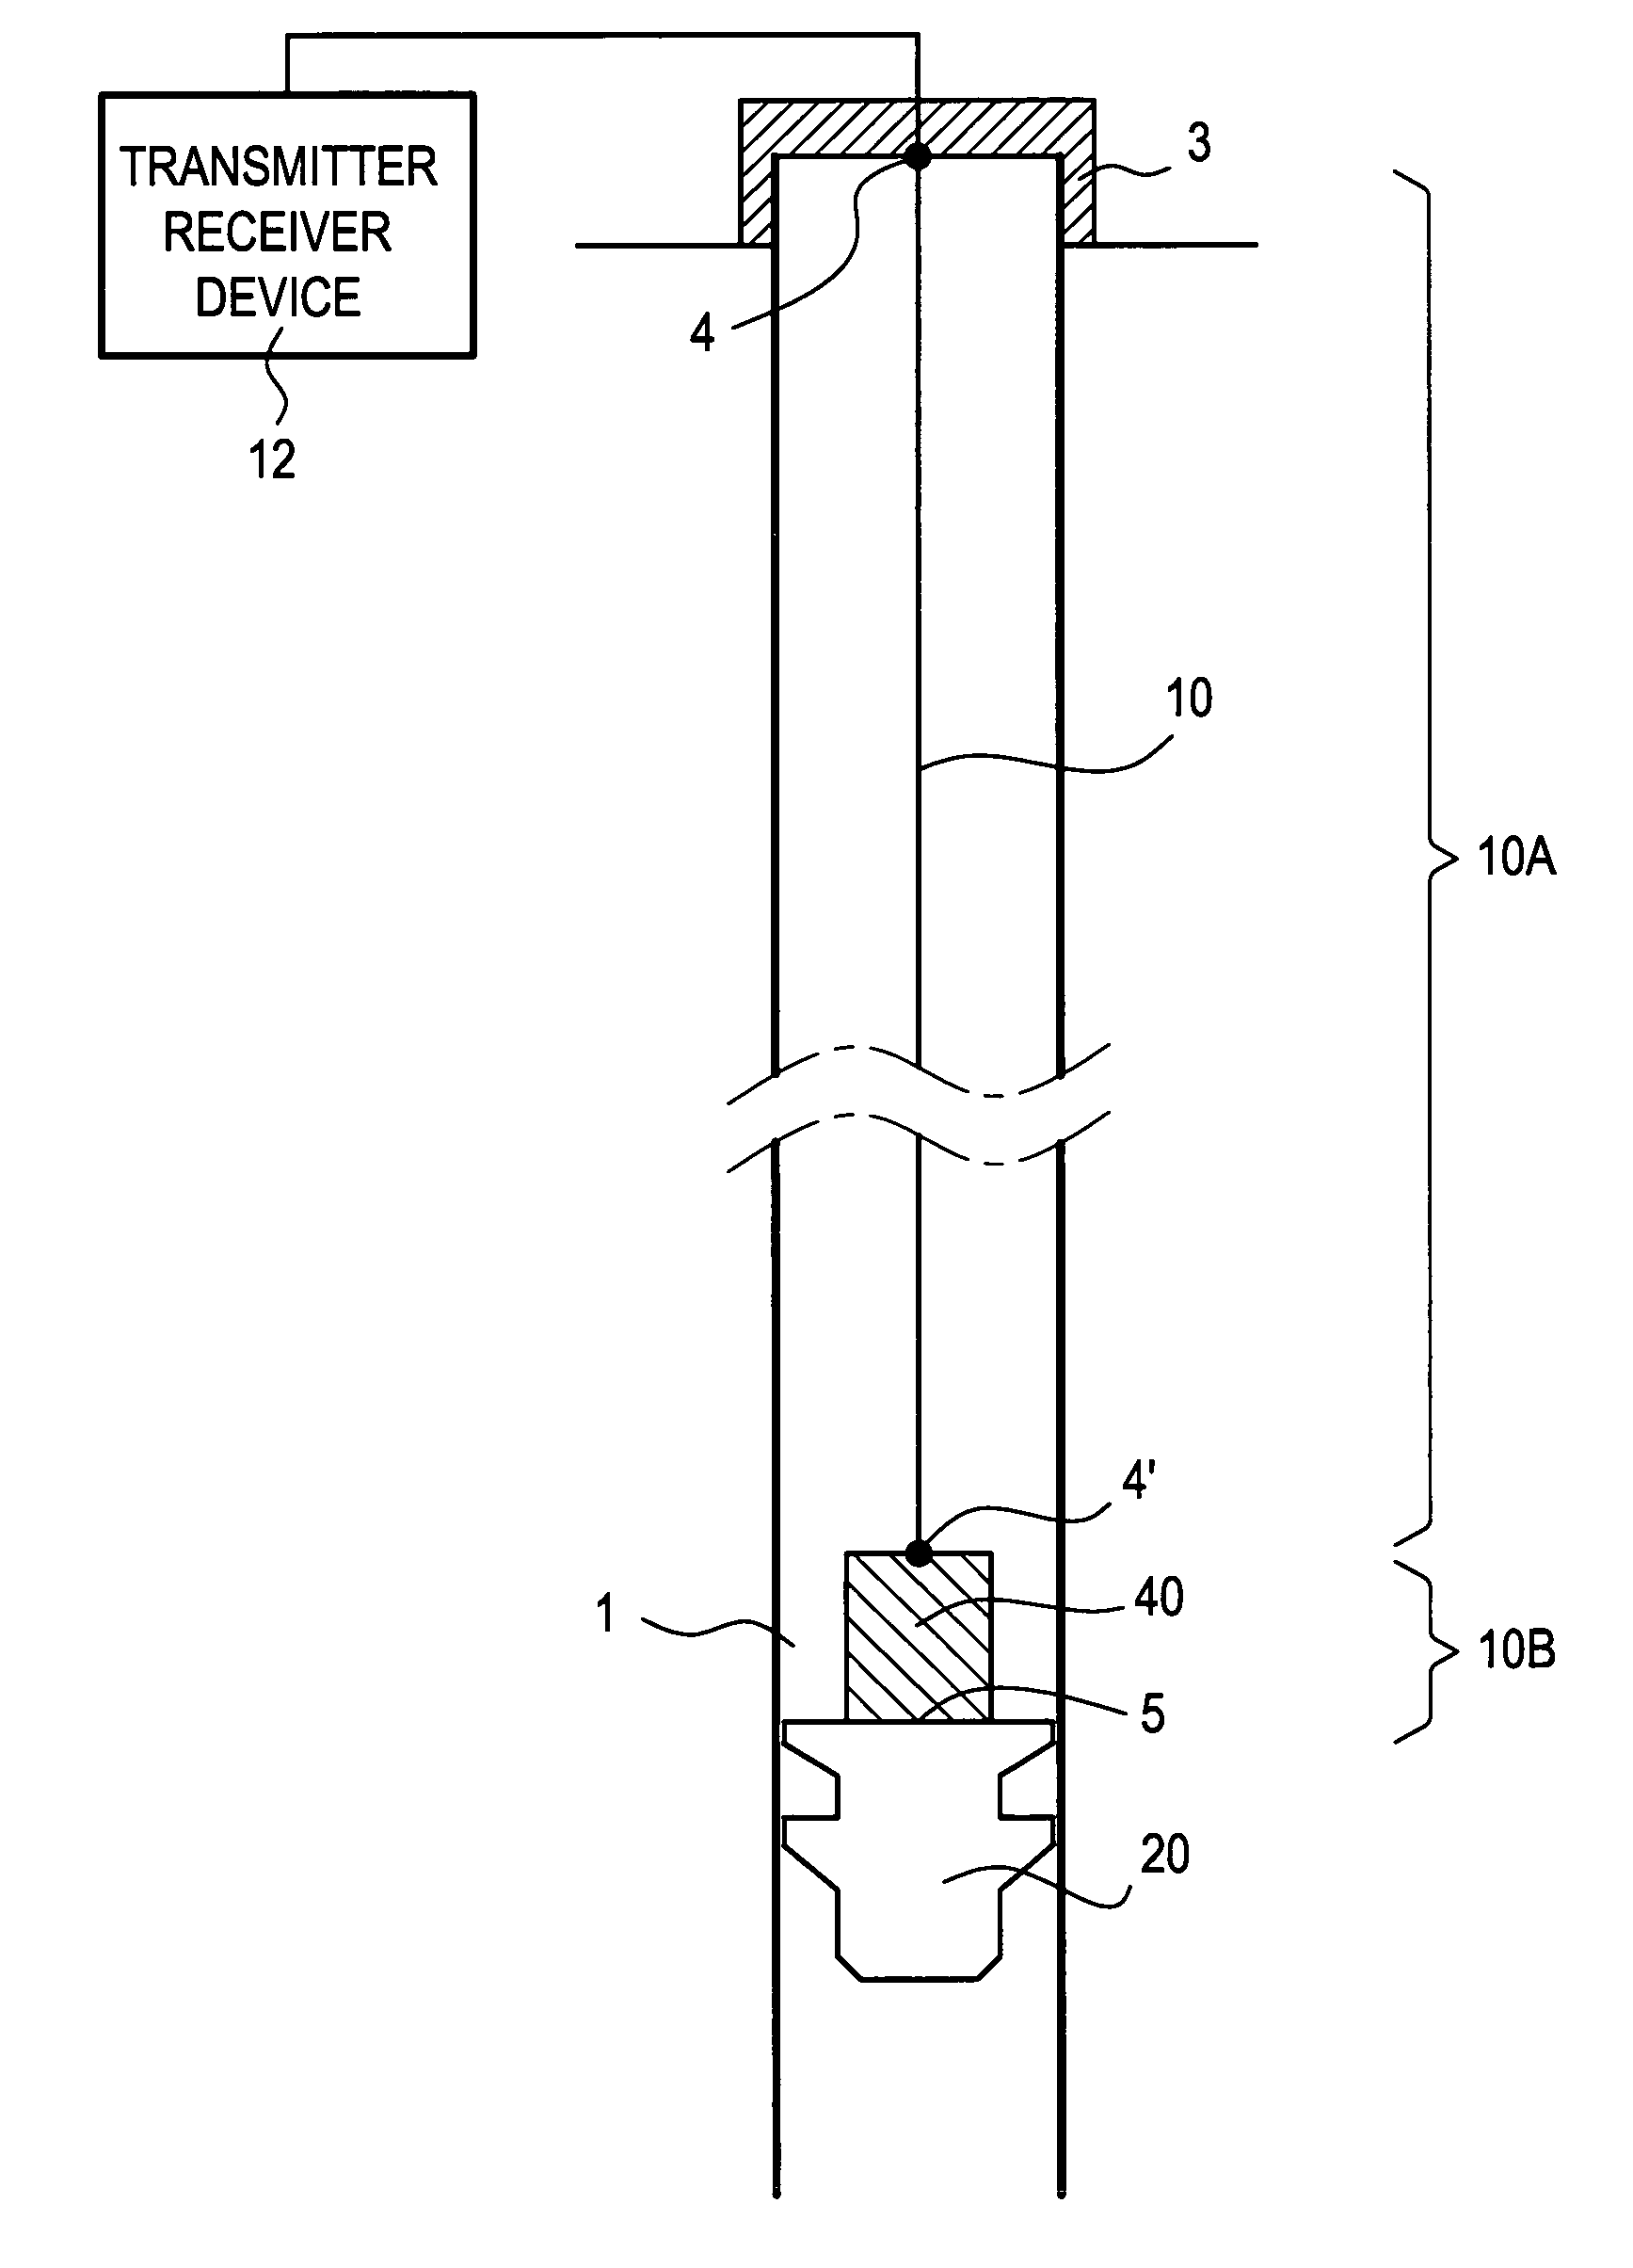 Method and Apparatus for Locating A Plug Within the Well